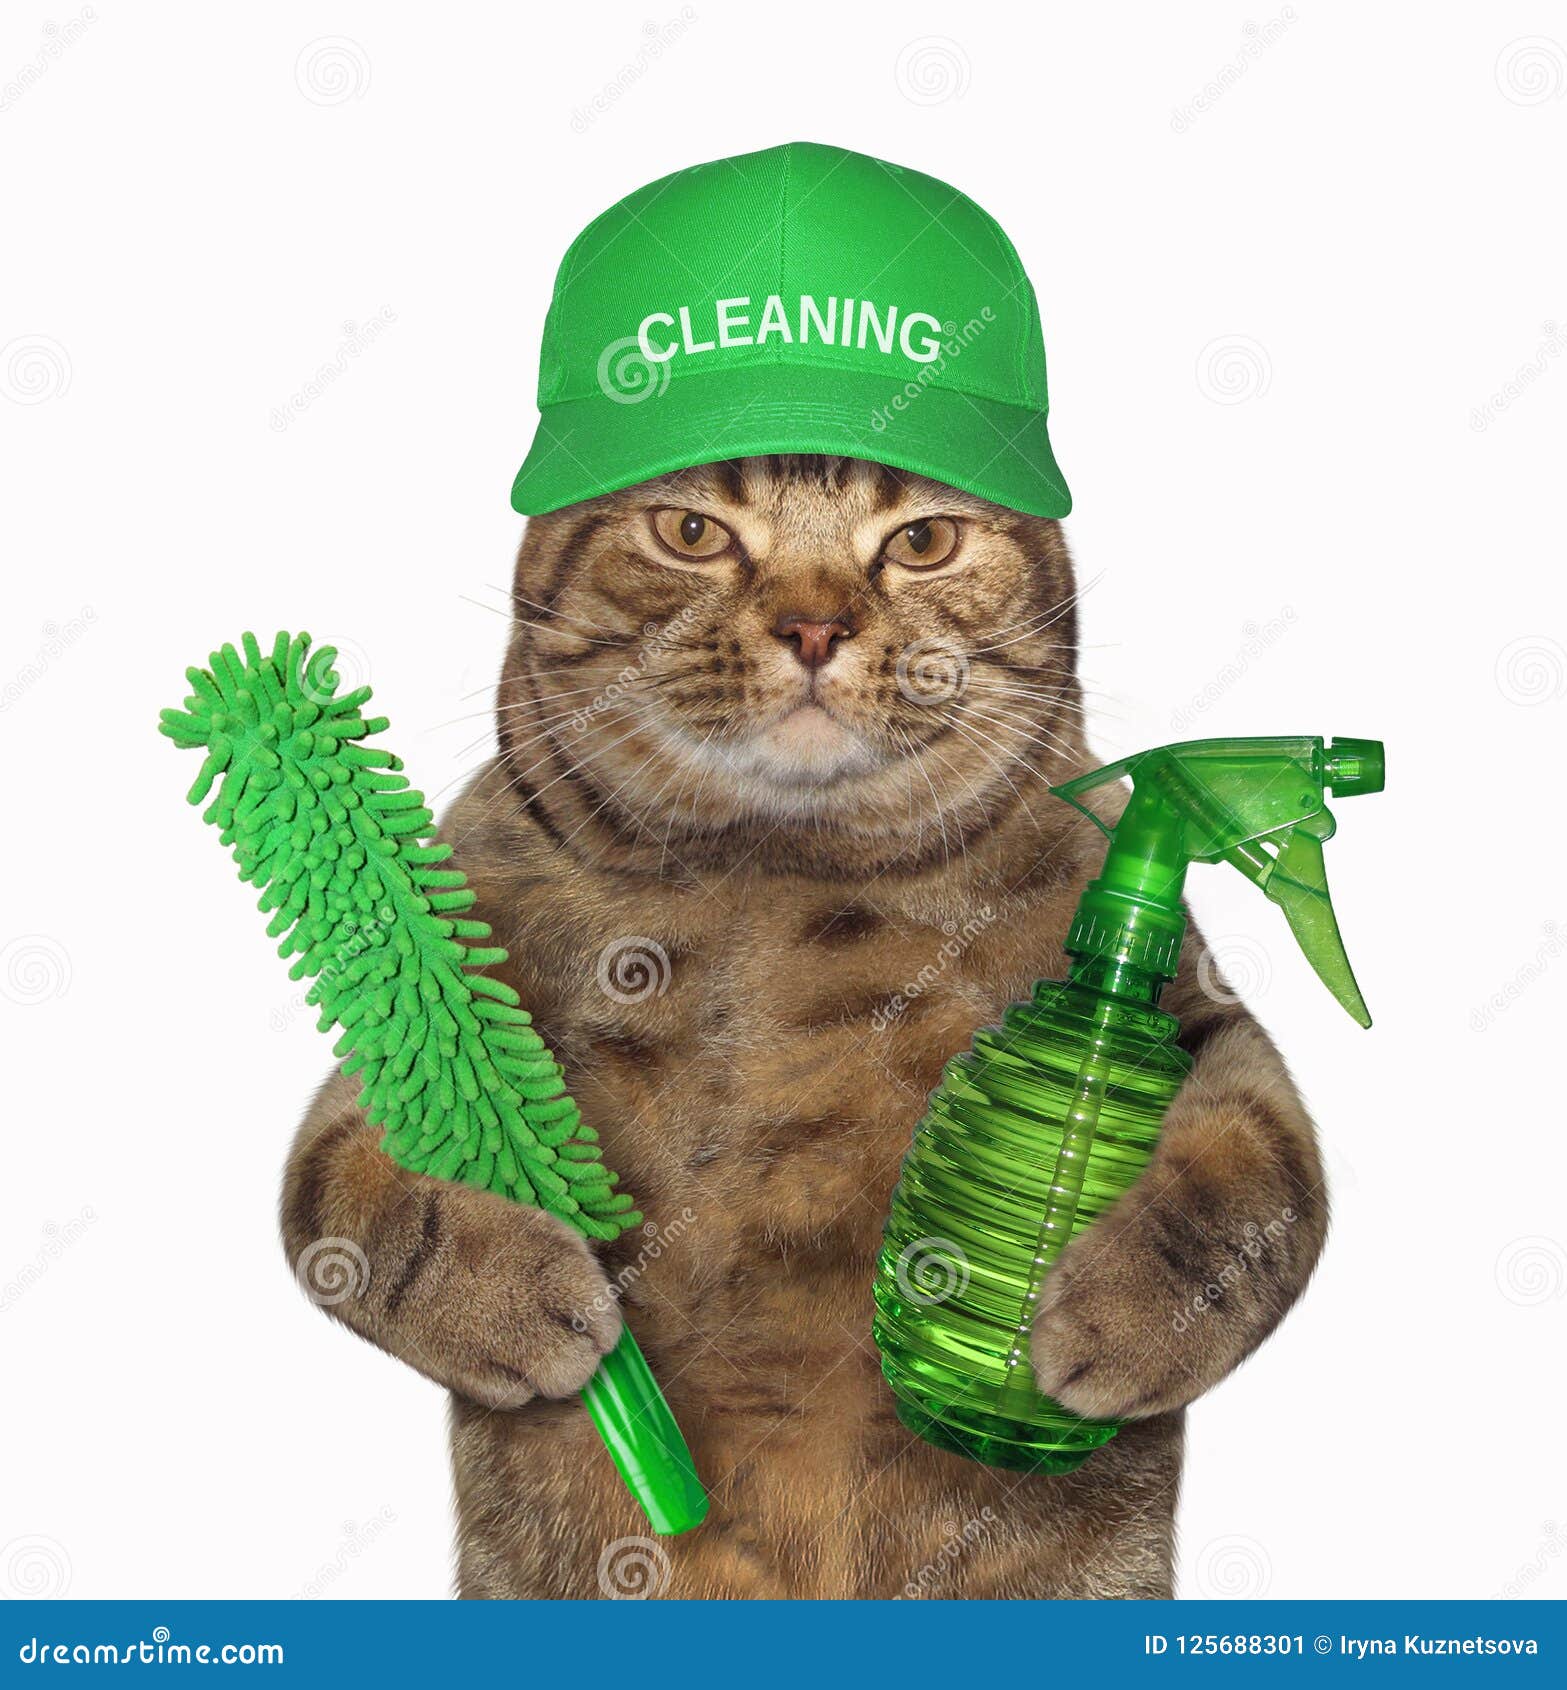 Cat With A Green Spray Bottle Stock Image Image of laborer, labor